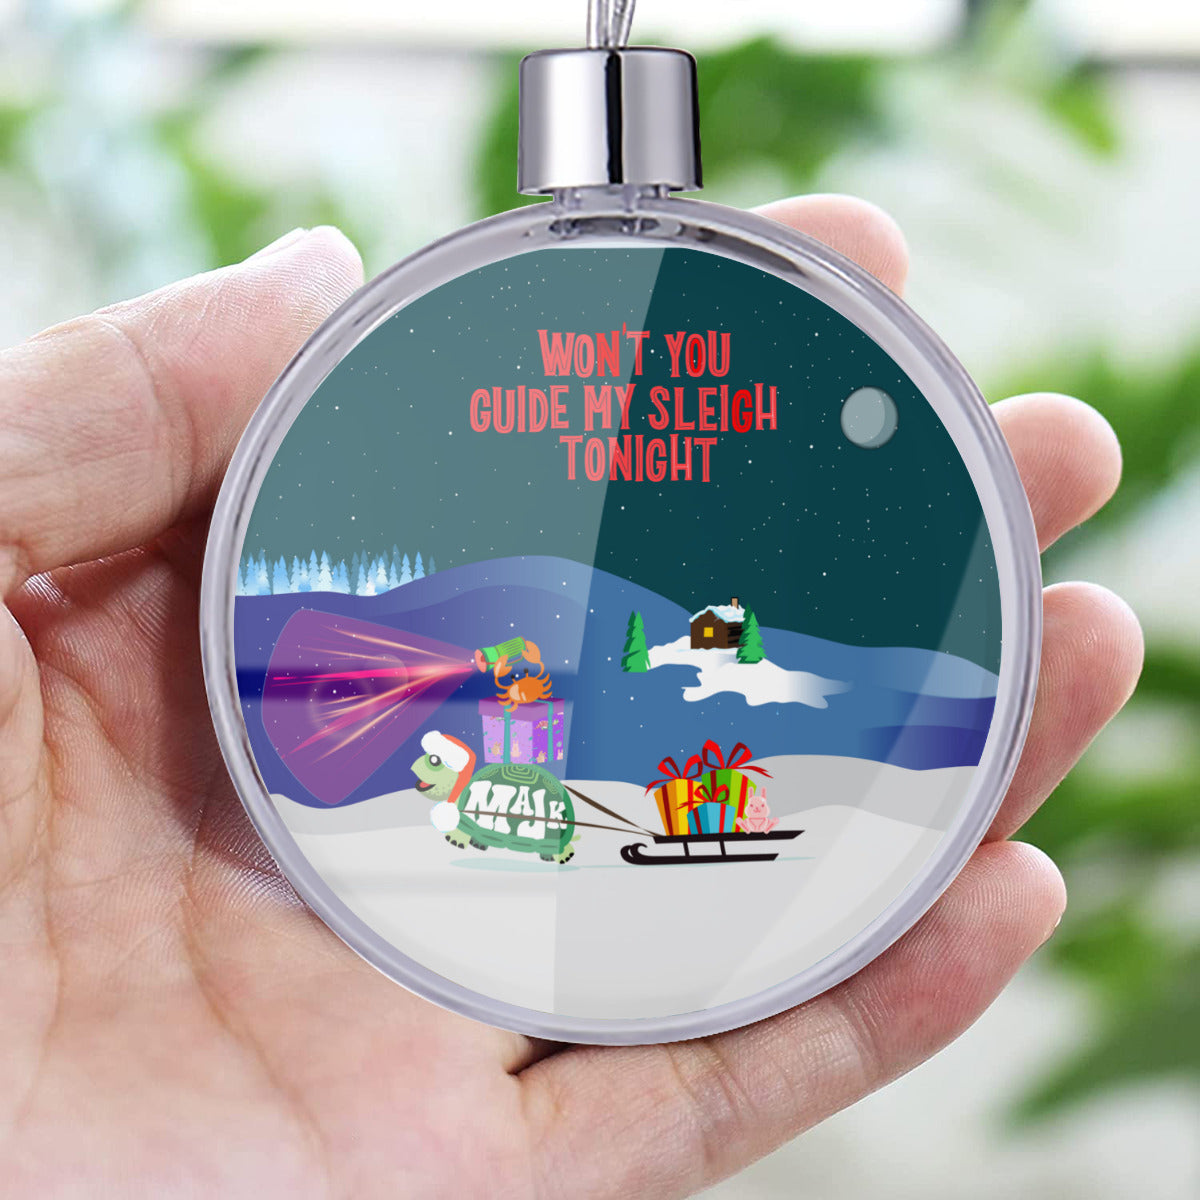 Christmas ornament "Won't you guide my sleigh tonight"